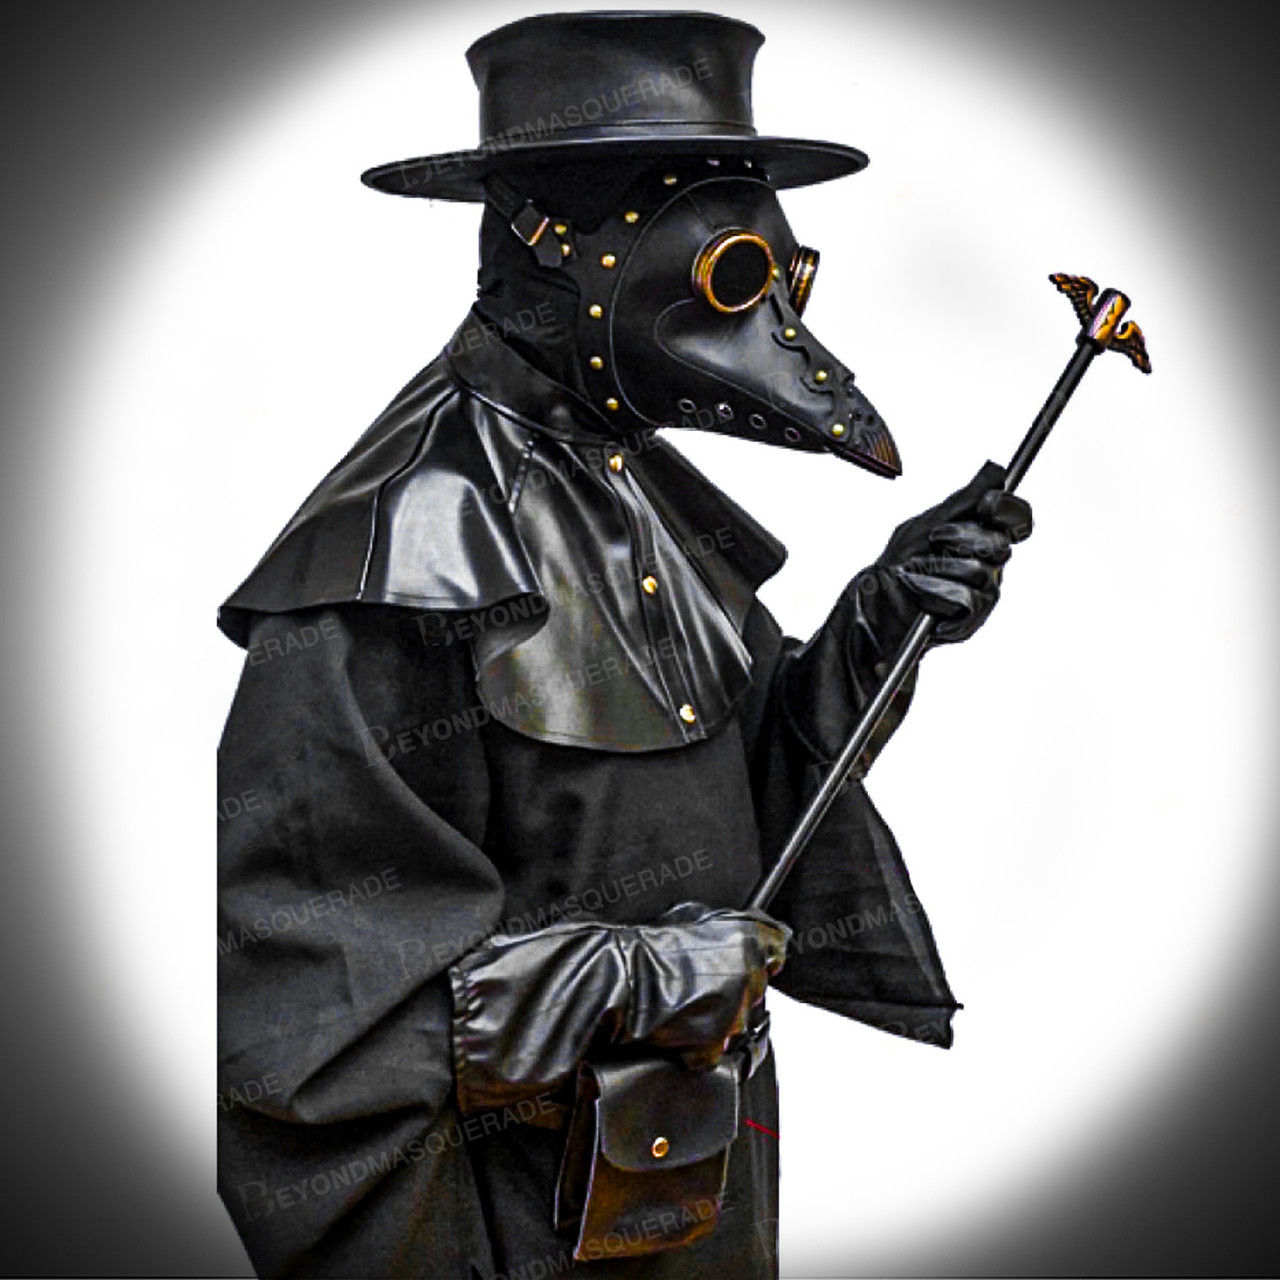 Plague Doctor Costume Full Steampunk Halloween Masquerade Mask Cosplay Costume Black